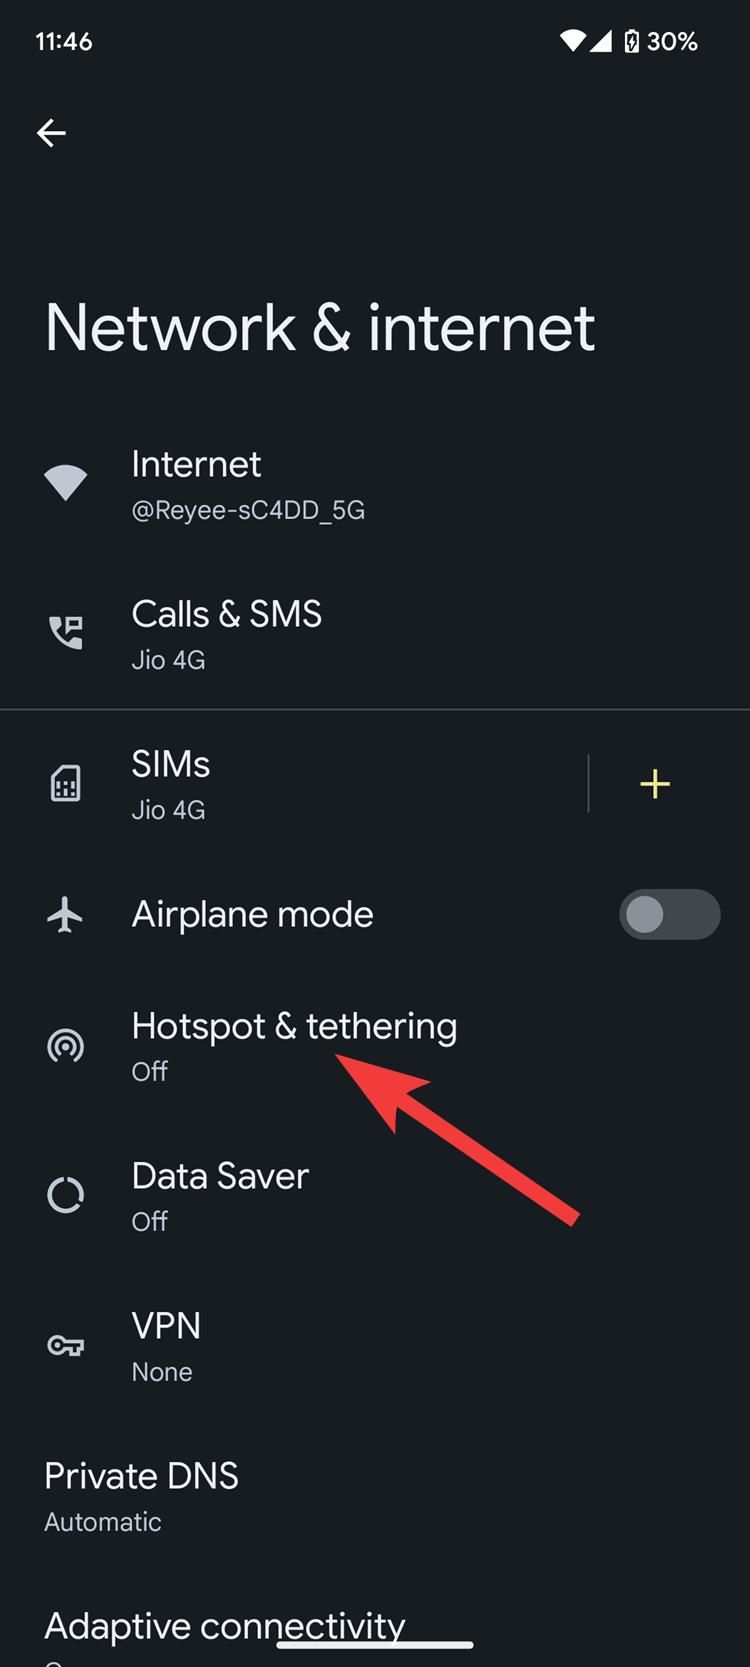 A screenshot of Android settings showing the hotspot and tethering section.